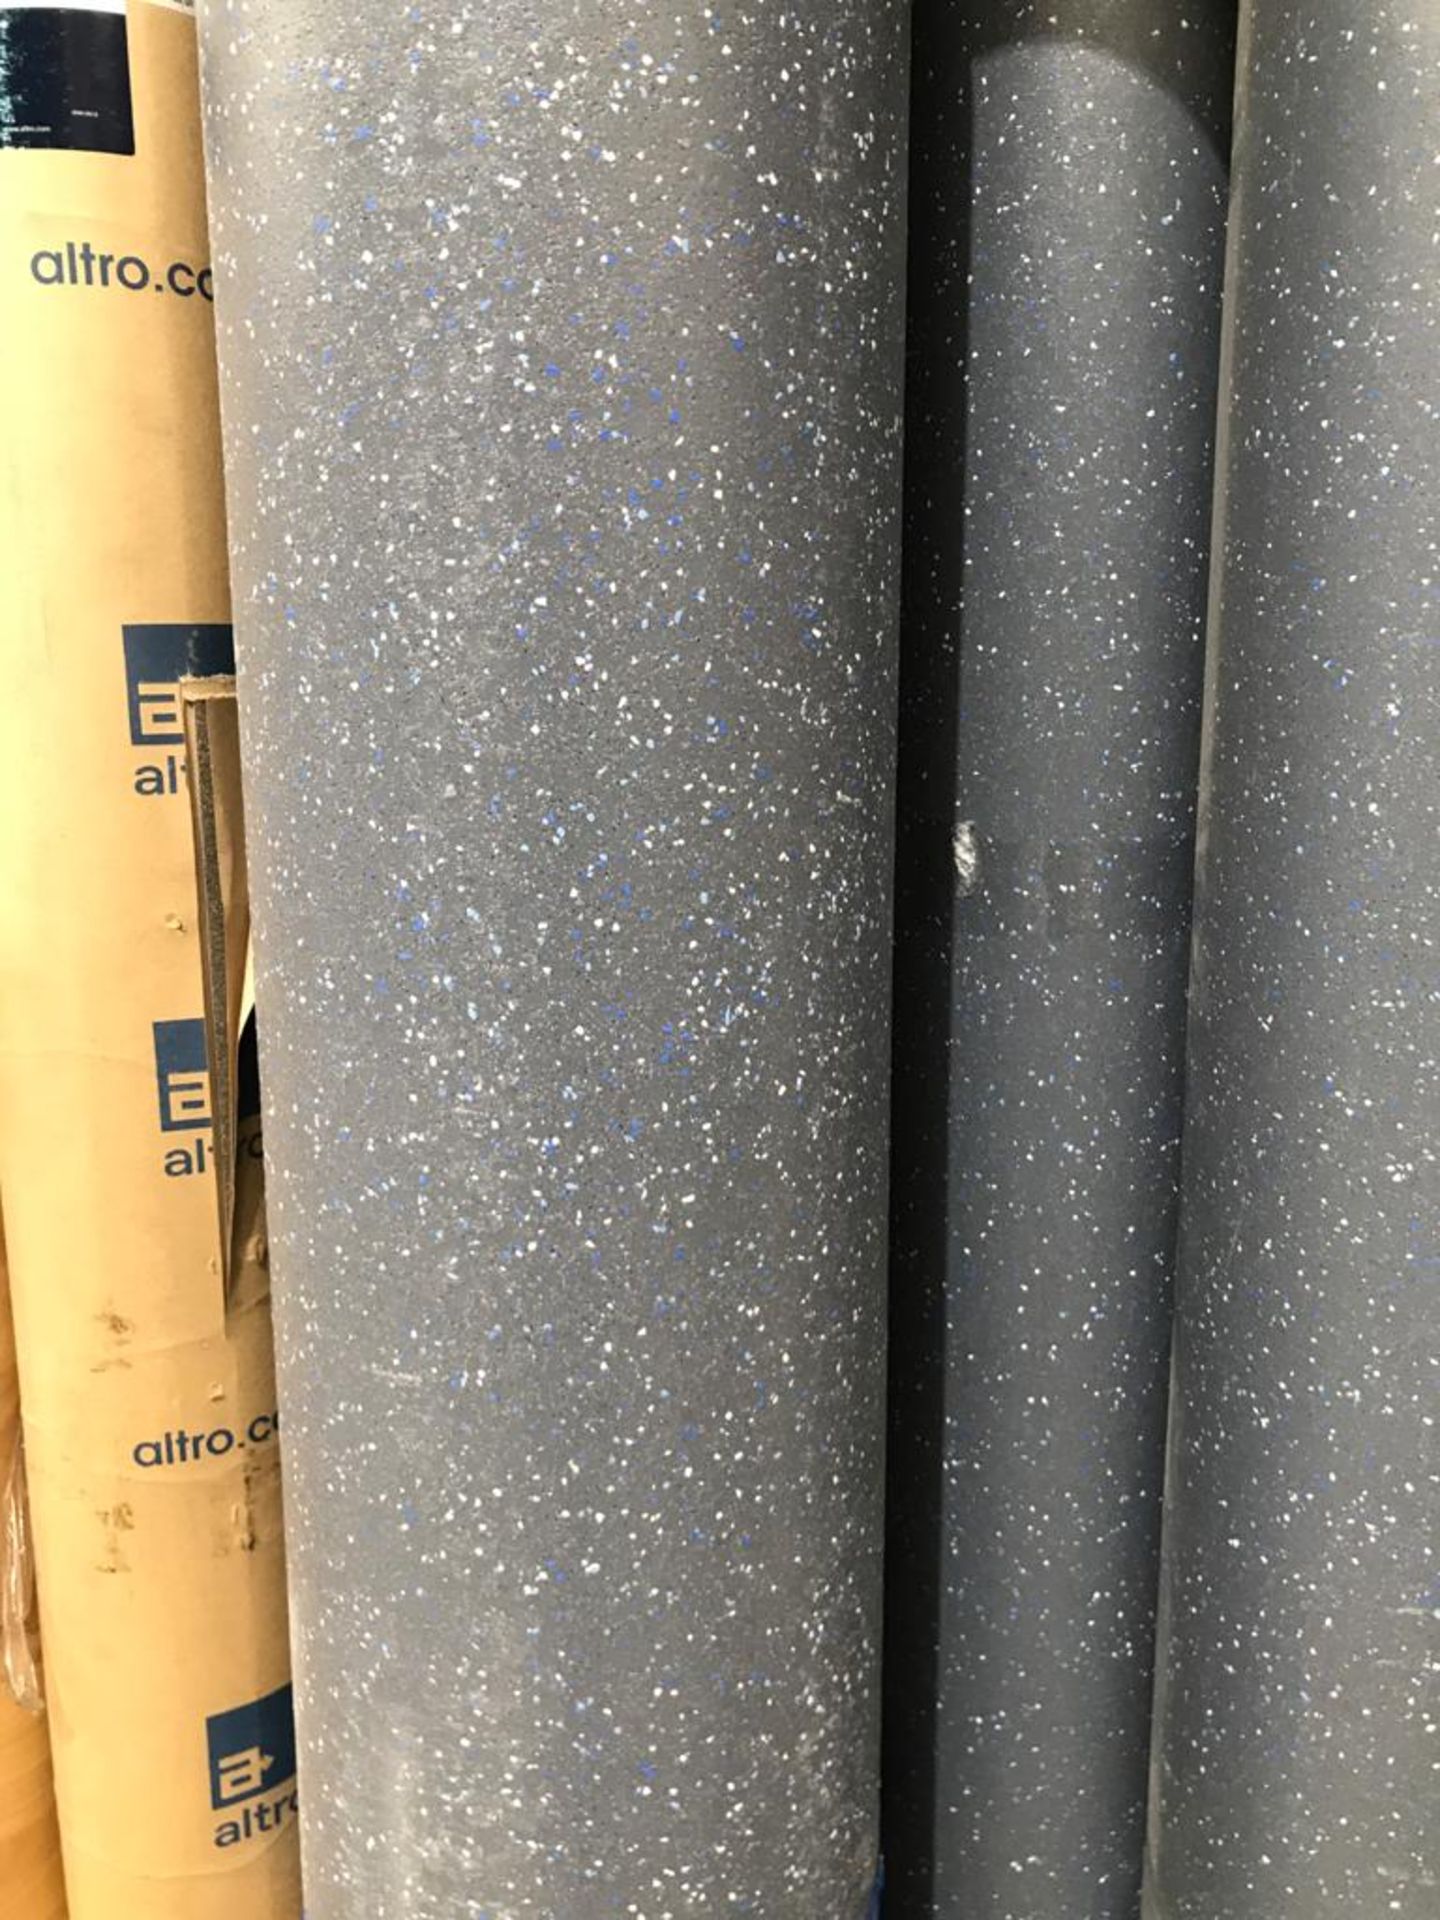 15x2m roll heavy duty commercial safety flooring colour storm grey - Image 2 of 2